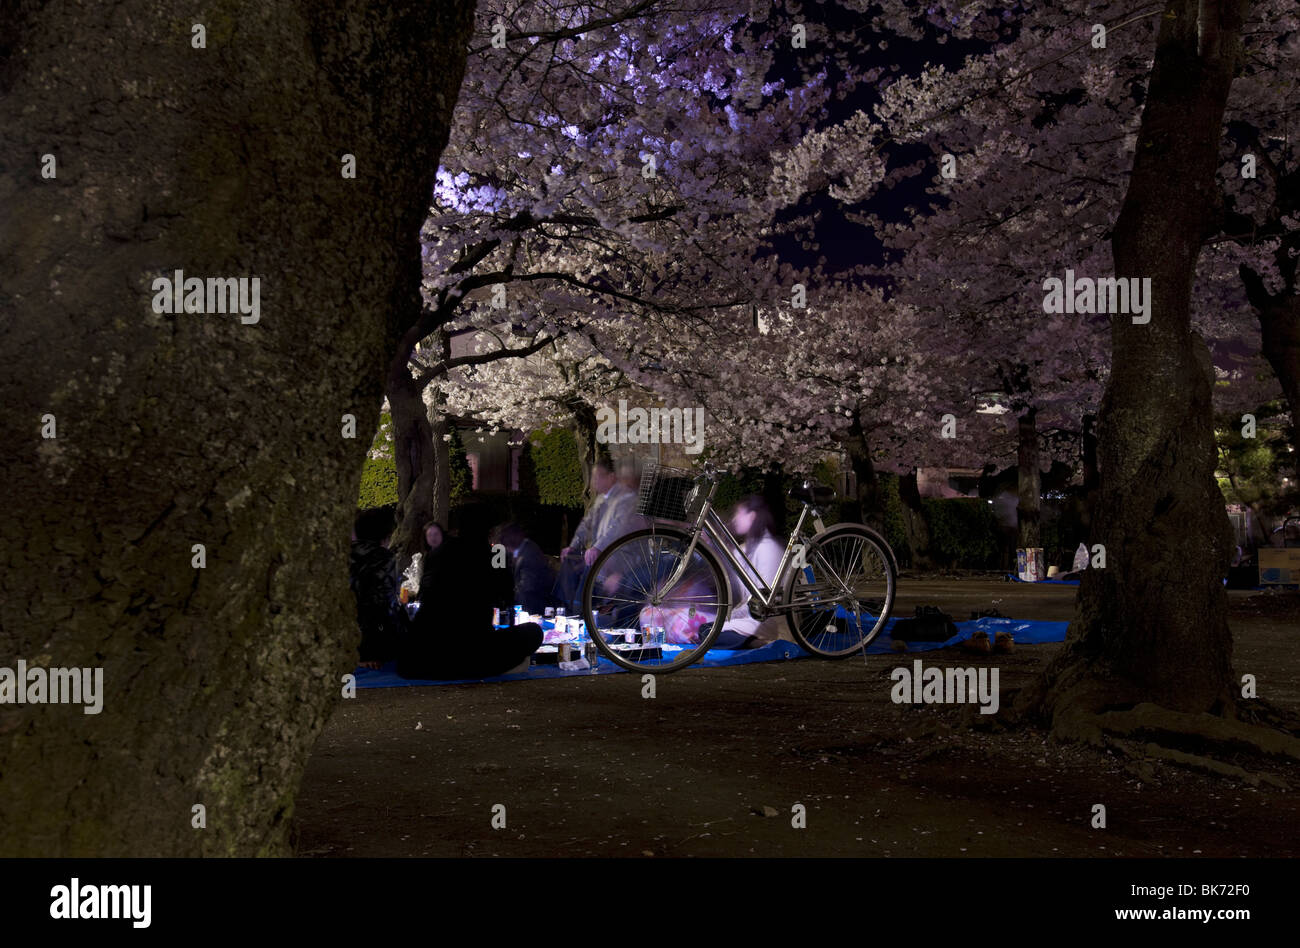 A group of Japanese business men and women enjoy a hanami party at night under the flowering cherry trees, Matsumoto, Japan Stock Photo